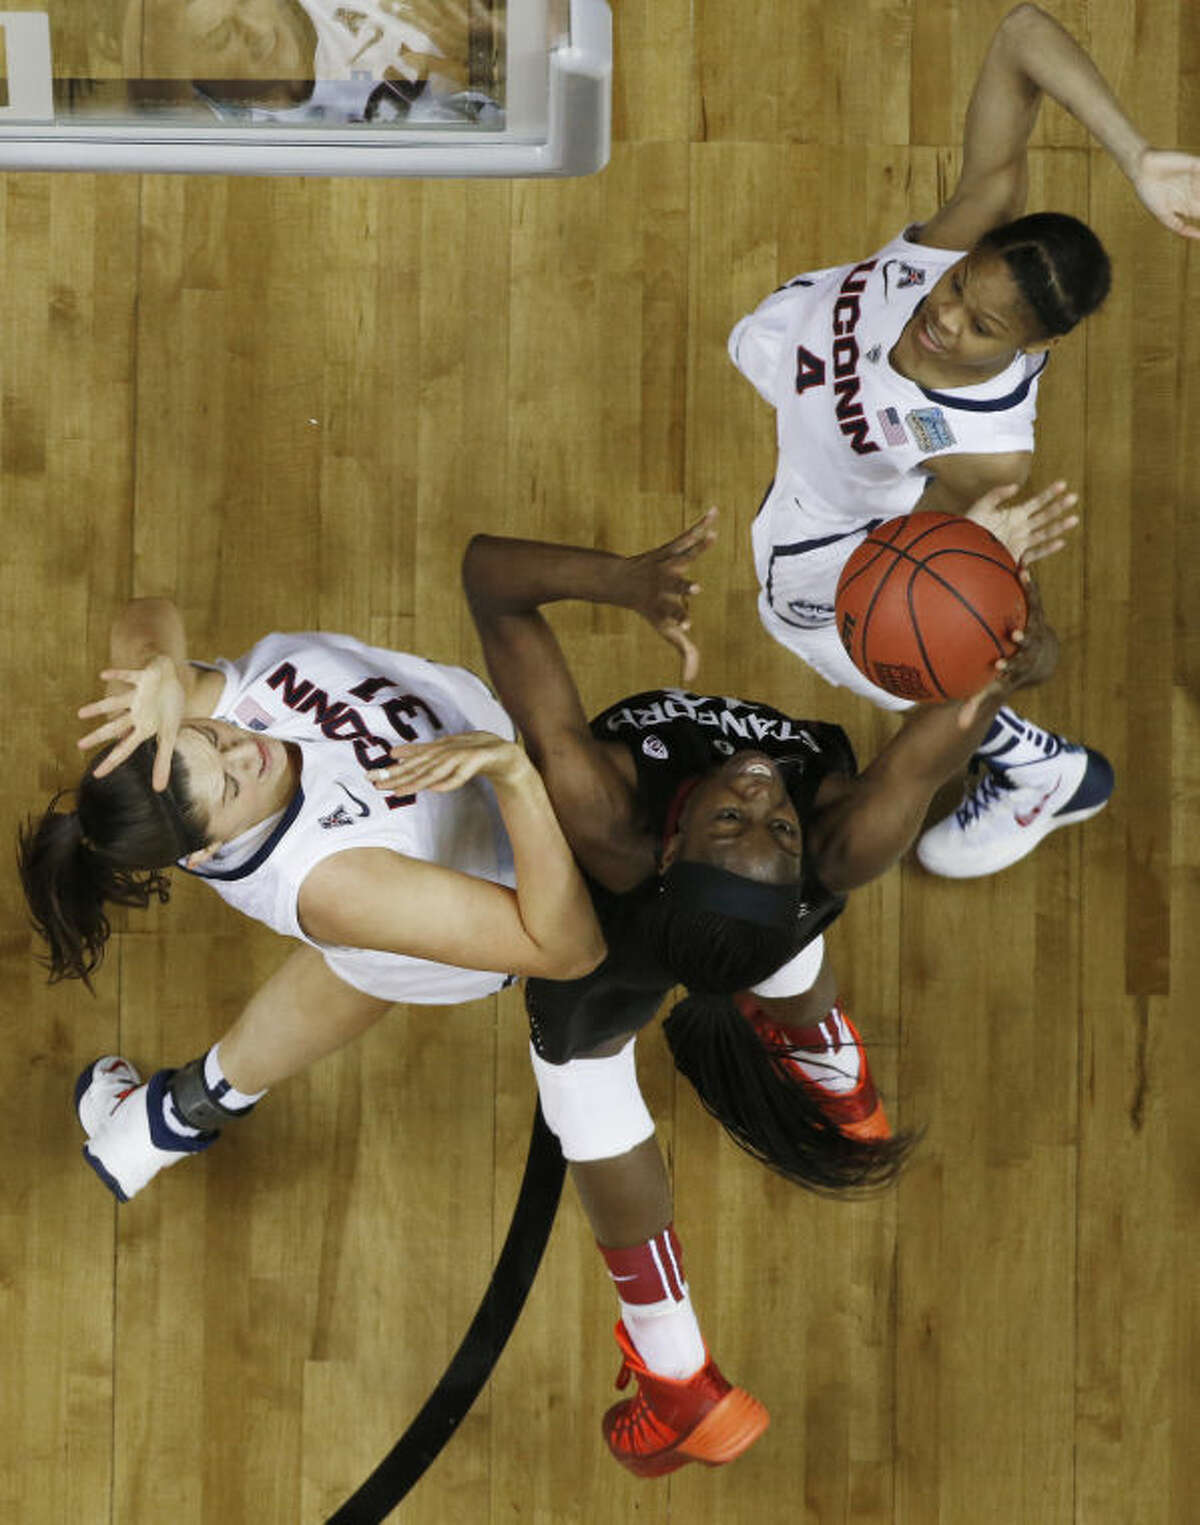 Stanford forward Chiney Ogwumike (13) works between Connecticut's Stefanie Dolson (31) Moriah Jefferson (4) during the second half of the semifinal game in the Final Four of the NCAA women's college basketball tournament, Sunday, April 6, 2014, in Nashville, Tenn. (AP Photo/John Bazemore)